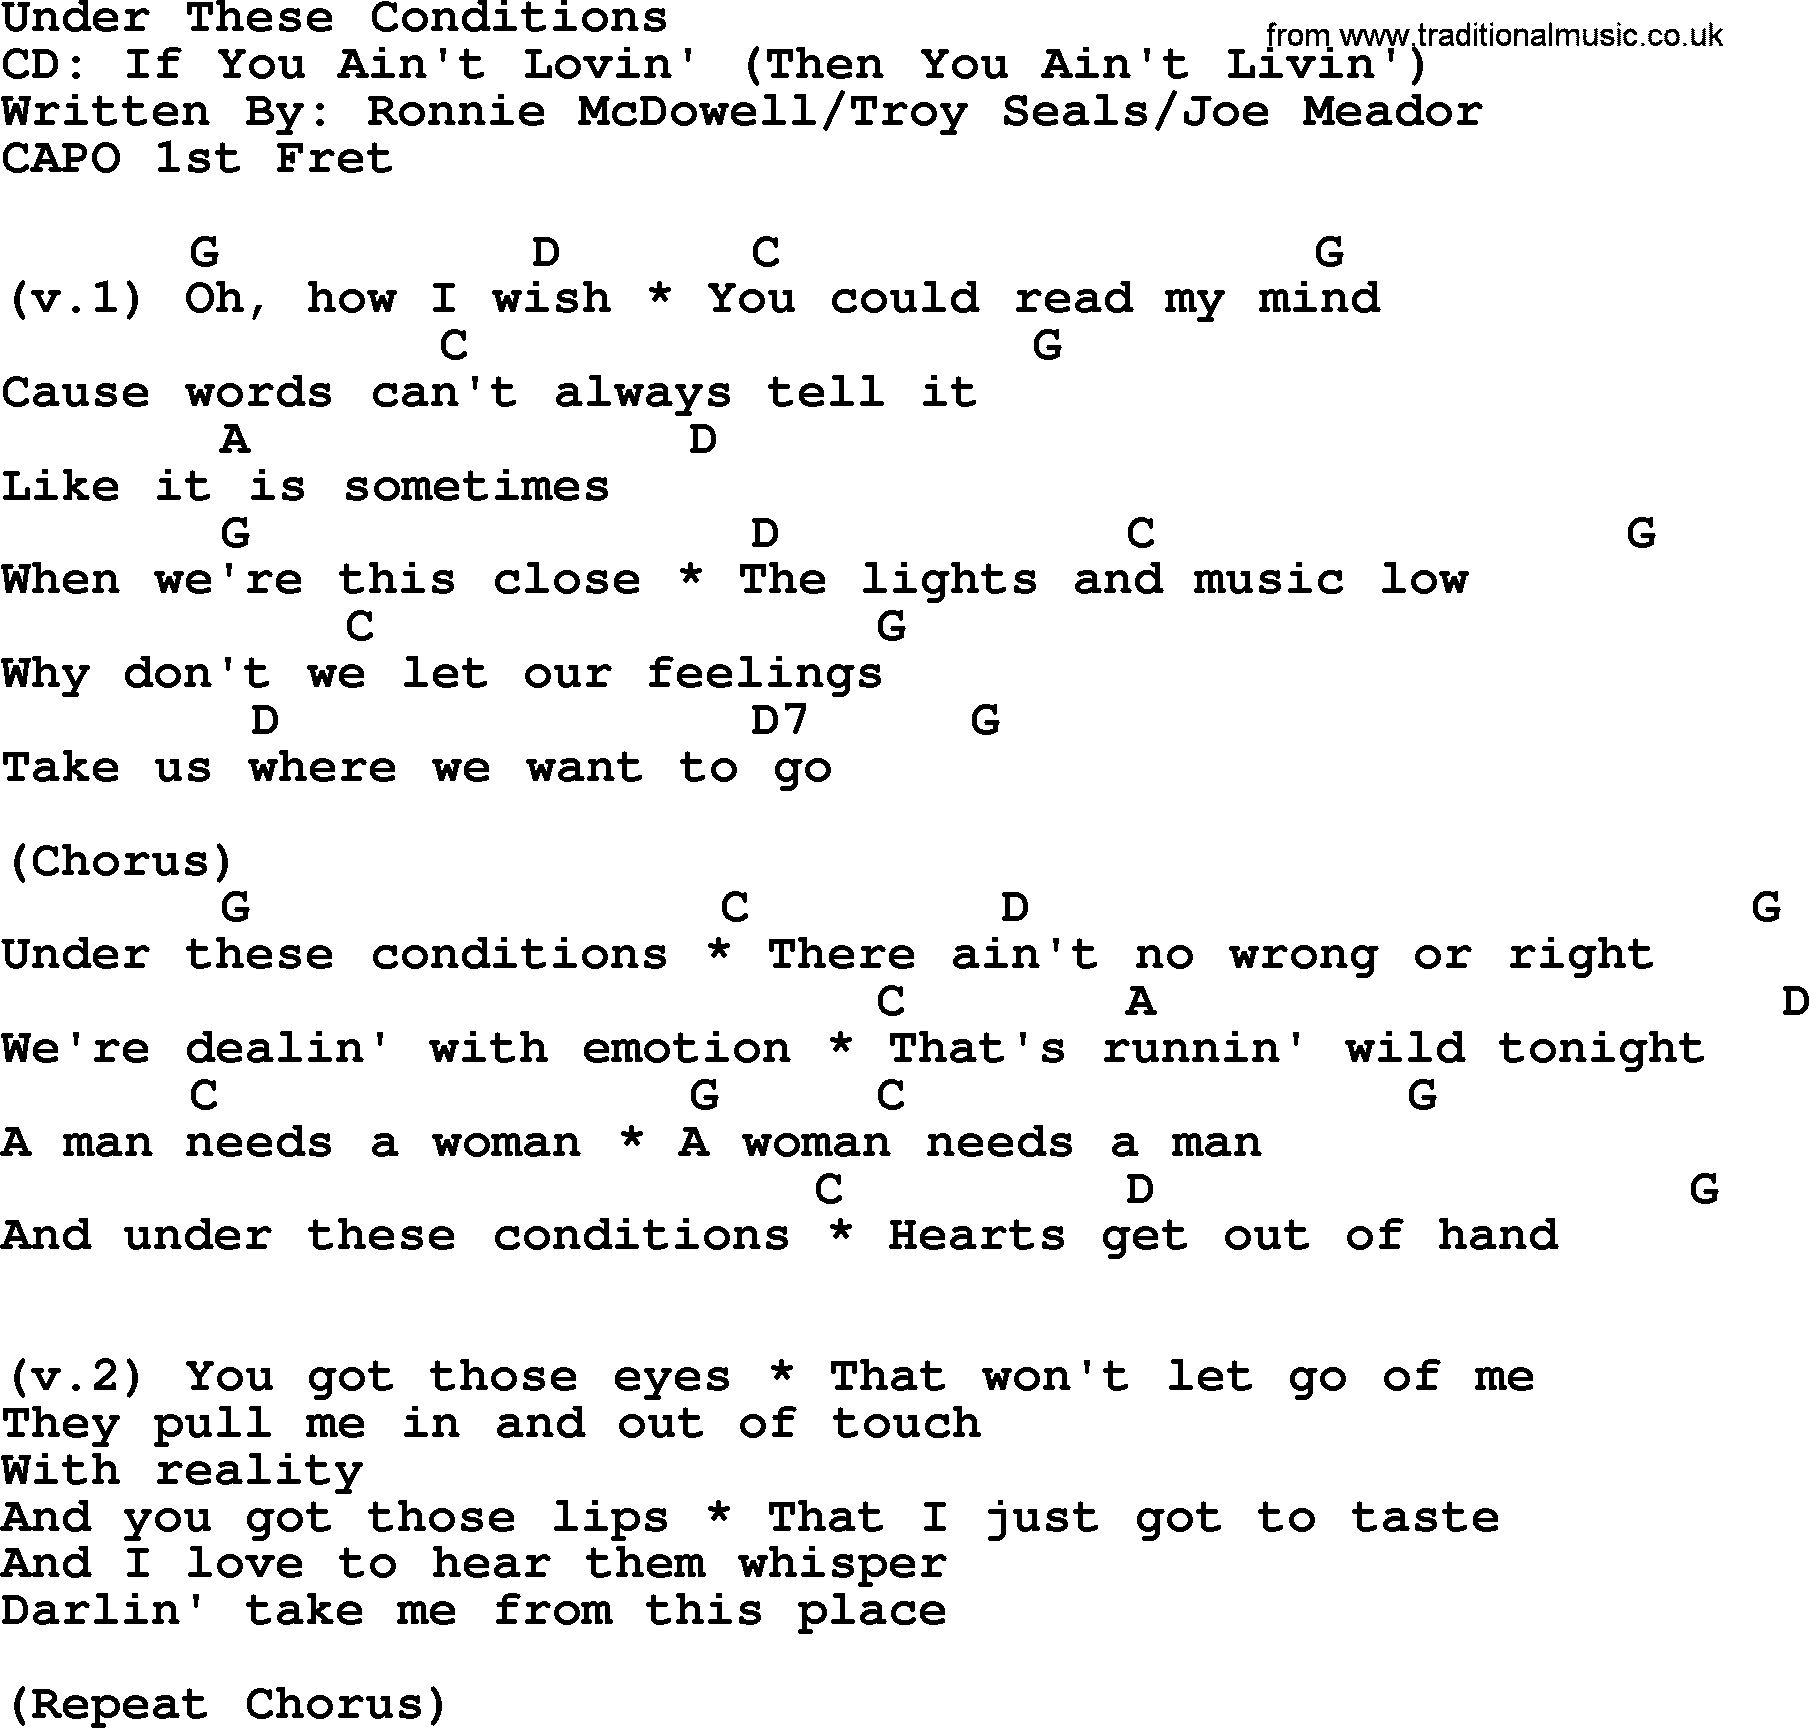 George Strait song: Under These Conditions, lyrics and chords